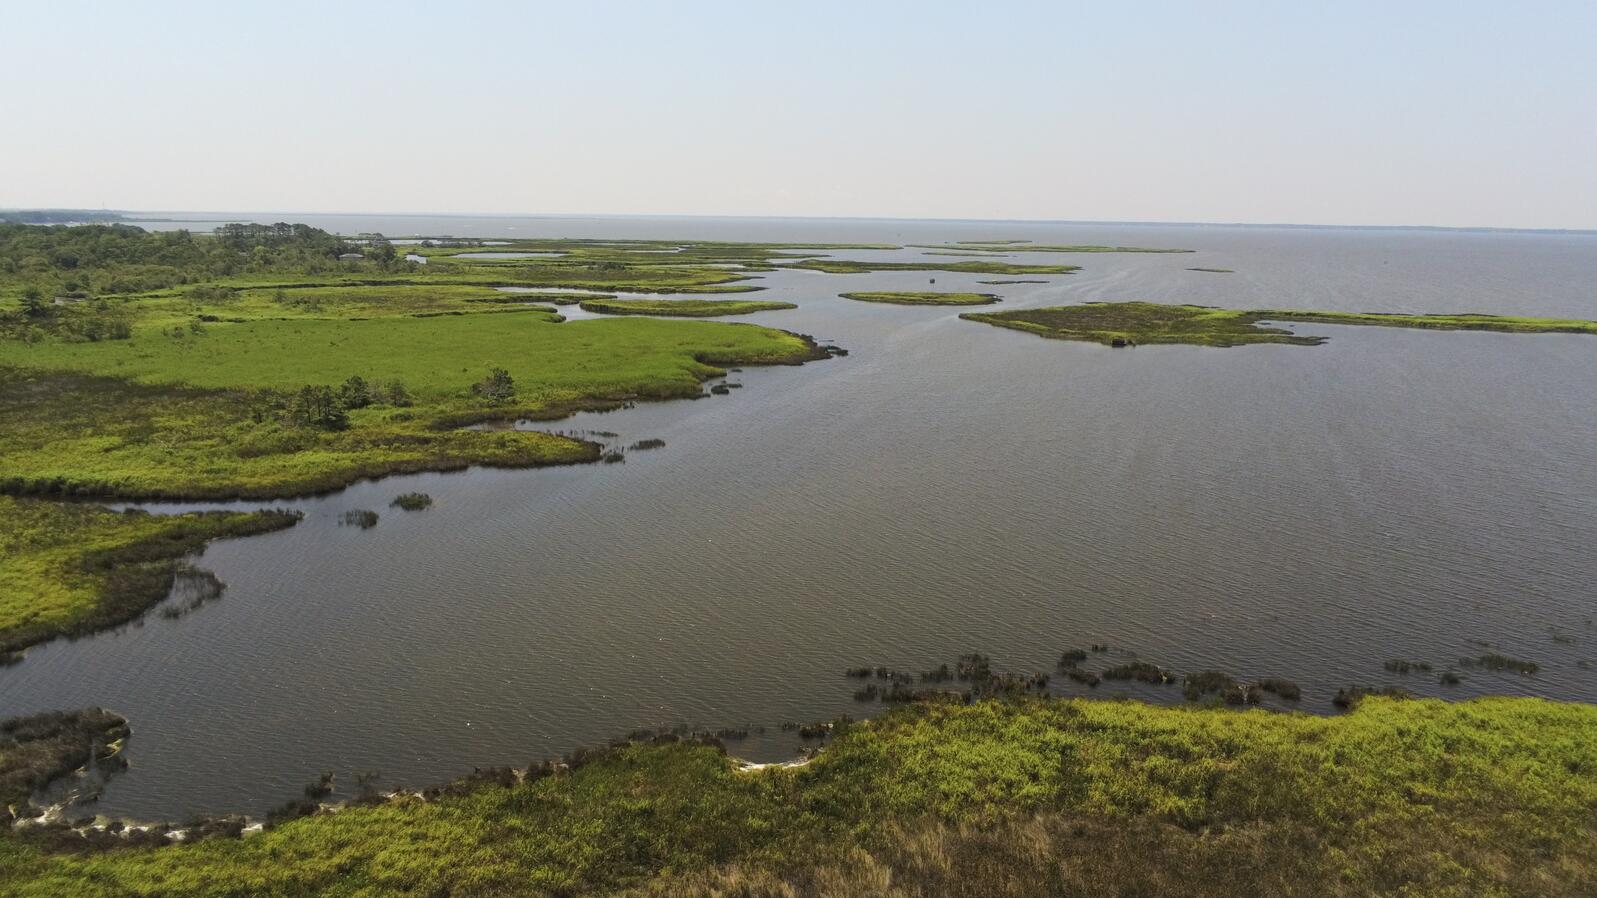 A new drone project by Elizabeth City State University will map Currituck Sound marshes from above.